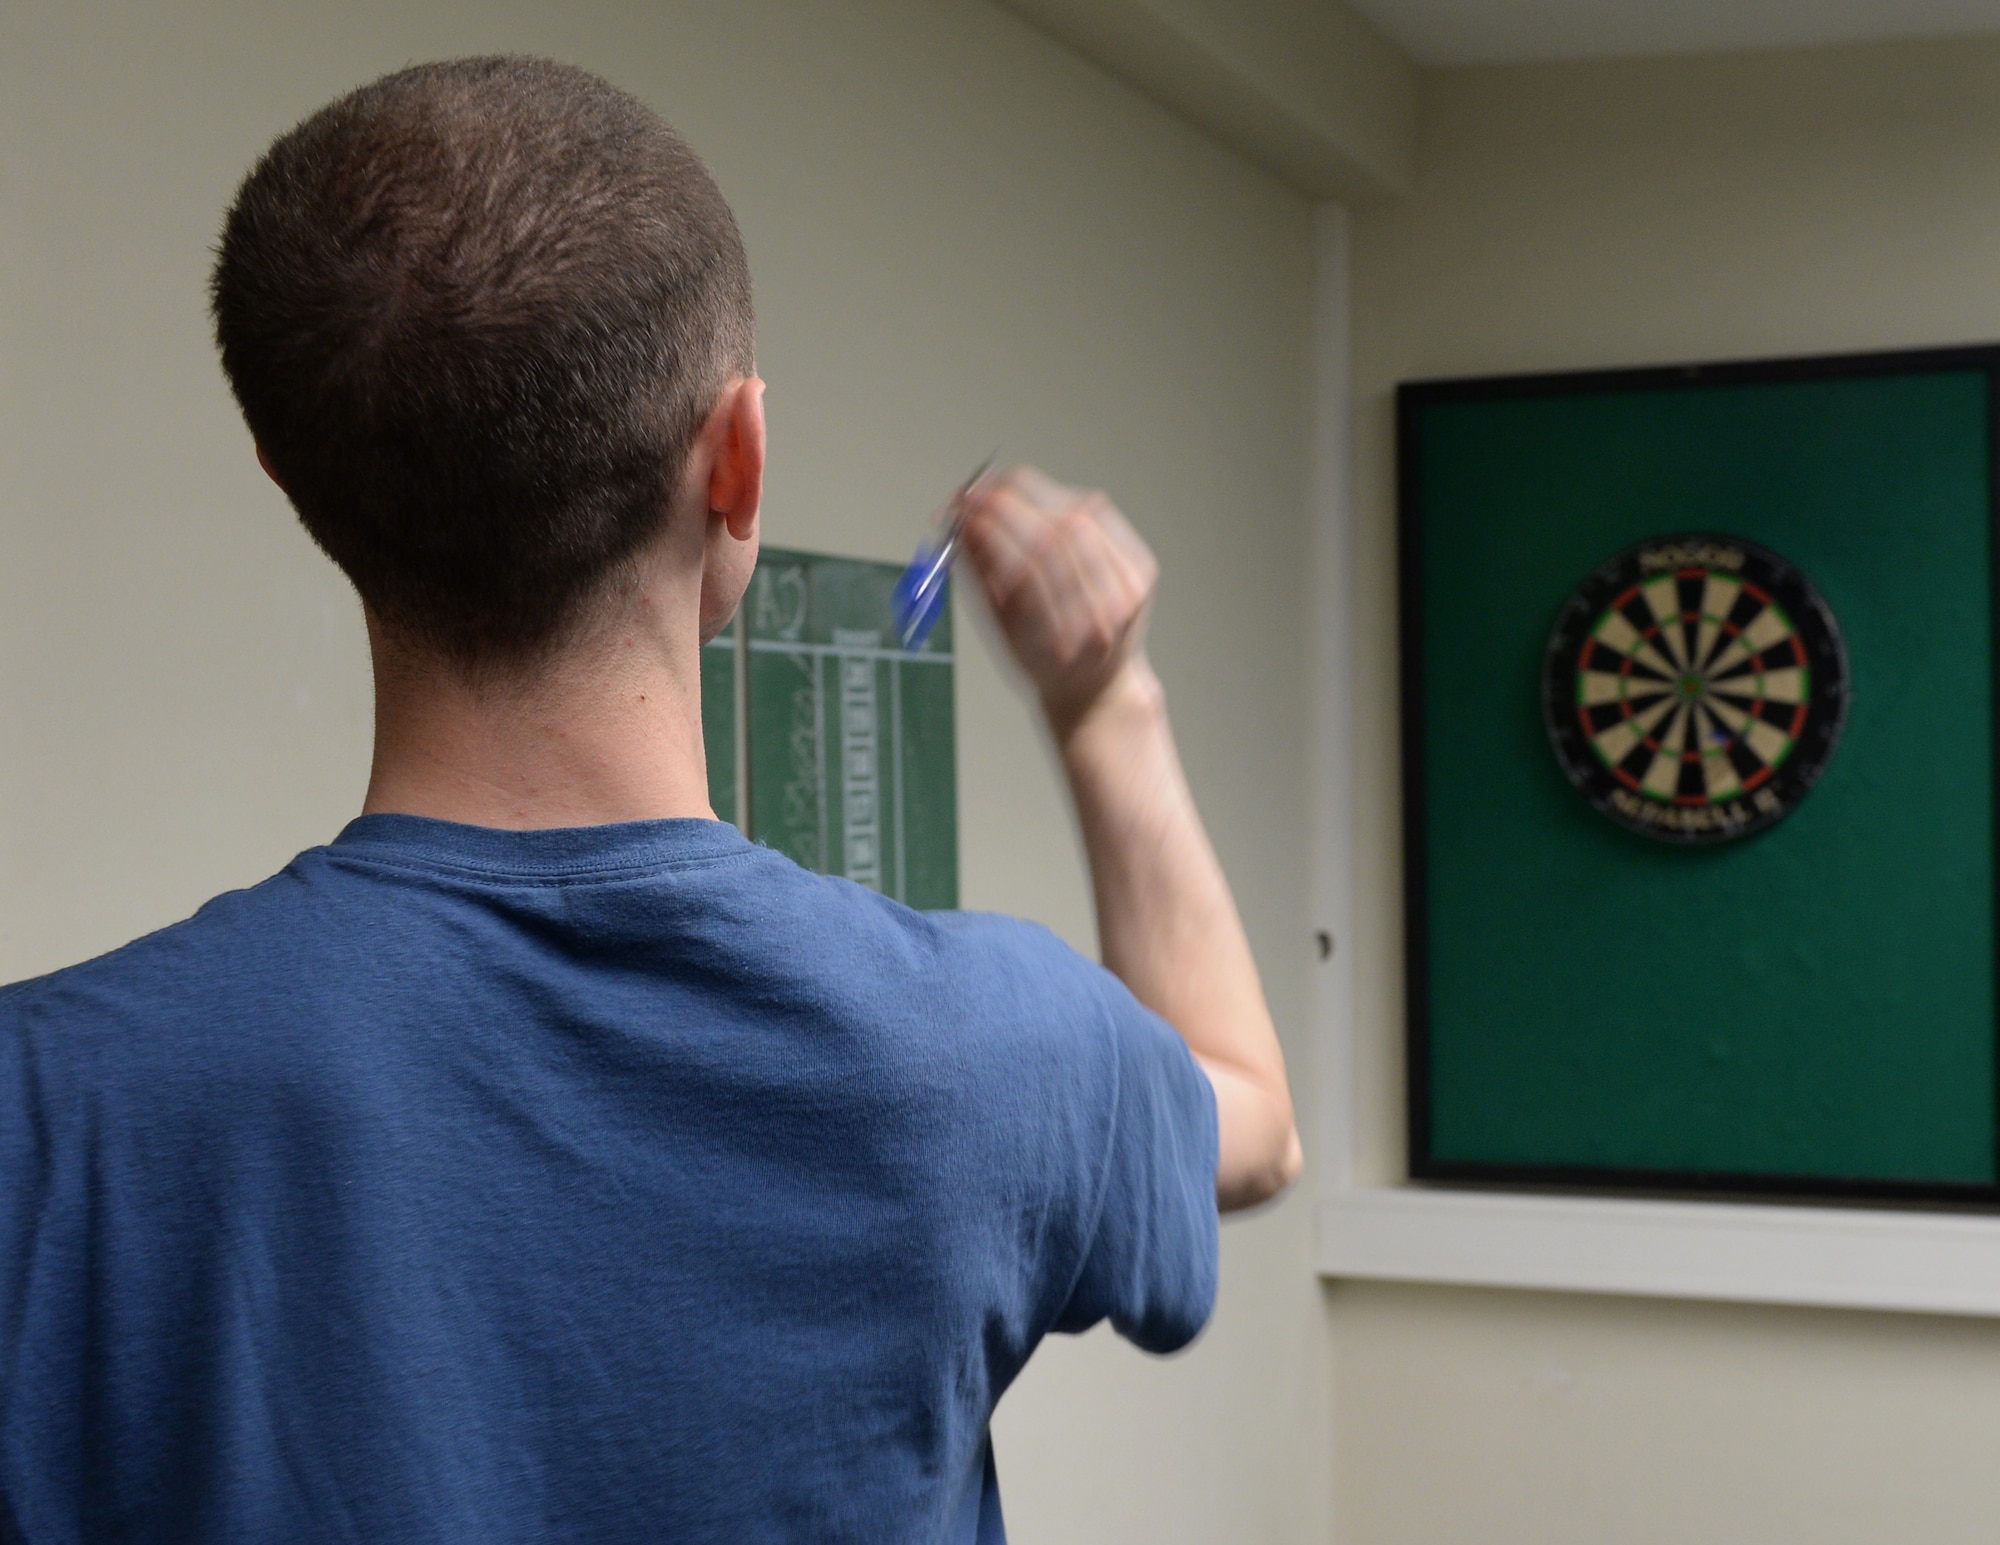 A U.S. Air Force Airman competes in a game of darts, at the Coffee Mill on Spangdahlem Air Base, Germany, April 10, 2015. The chapel recently purchased a new pingpong table and air hockey table. It also has a pool table, darts, flat screen TV's, board and video games. (U.S. Air Force photo by Senior Airman Dylan Nuckolls/Released)